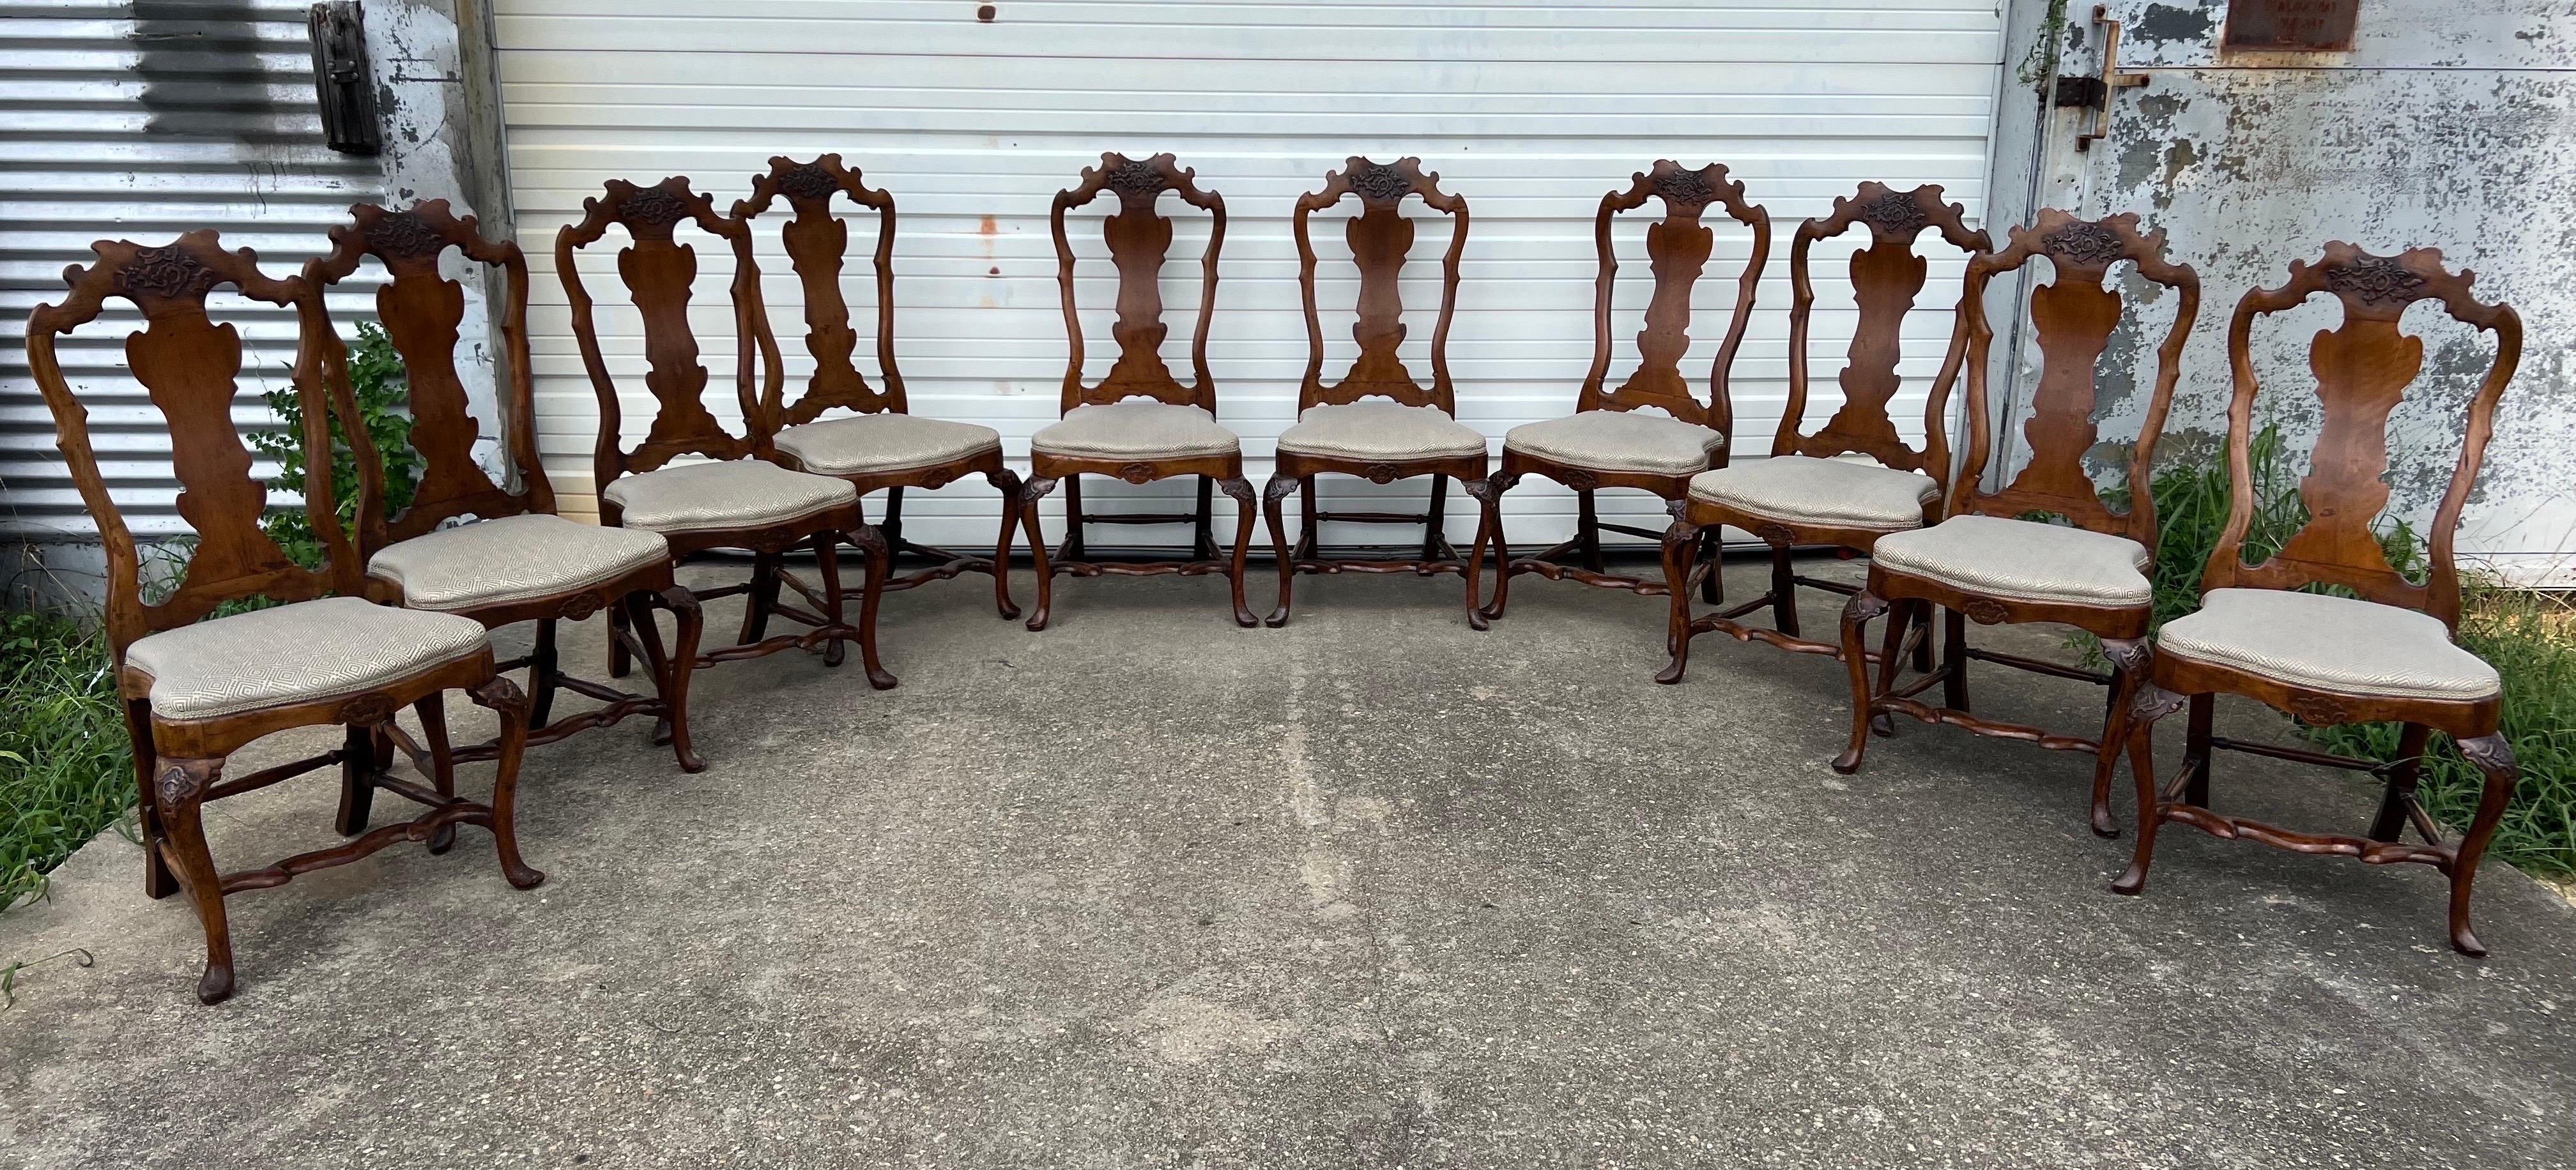 Very fine set of 10 18th century Italian carved walnut dining chairs from the late baroque- early rococo period. Recently upholstered in an attractive fortuny fabric with no stains observed. Early sets of chairs of this size are quite rare to find.